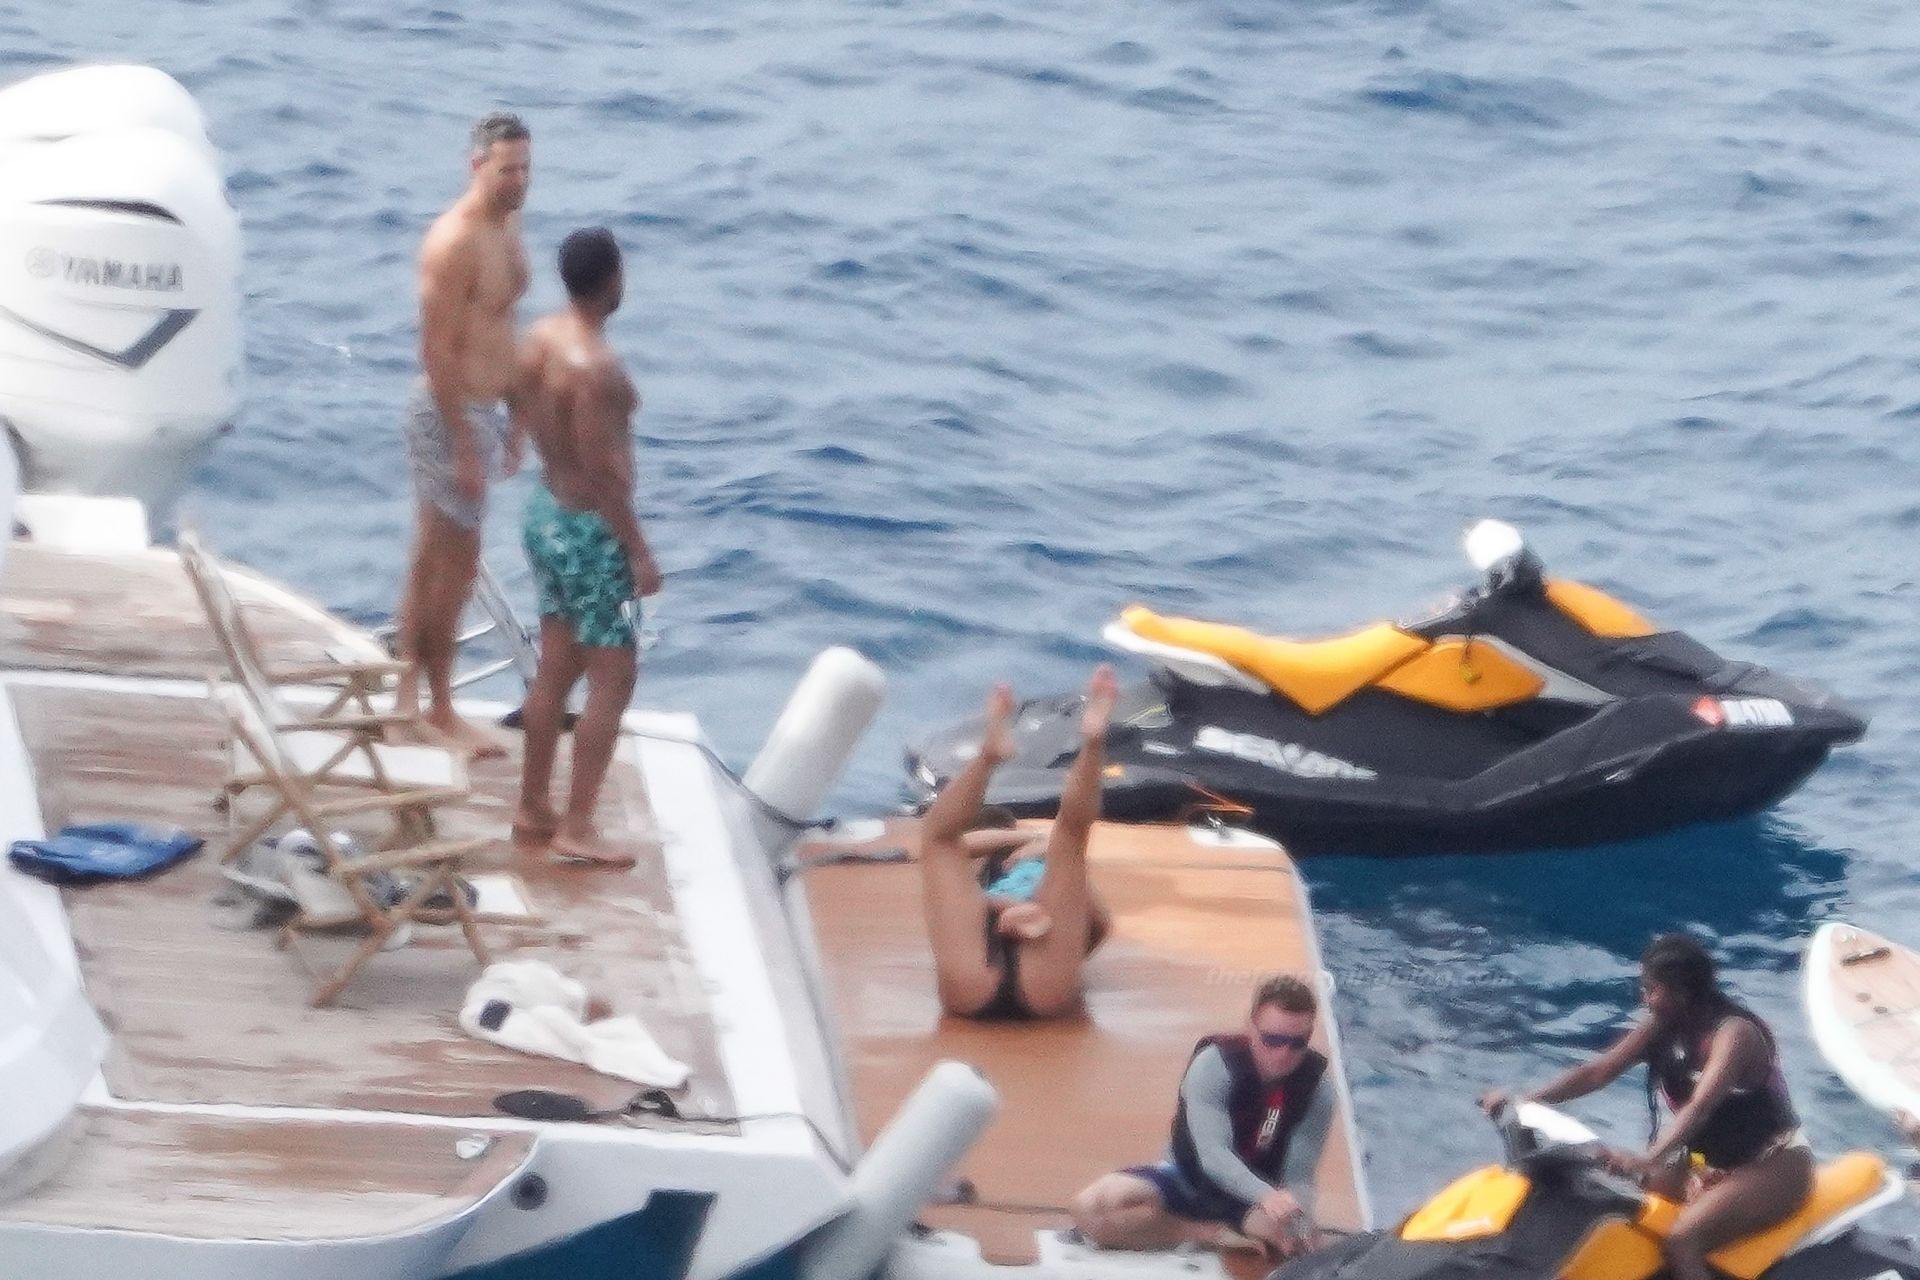 John Legend & Chrissy Teigen are Sliding Out of 2020 in St. Barts (17 Photos)